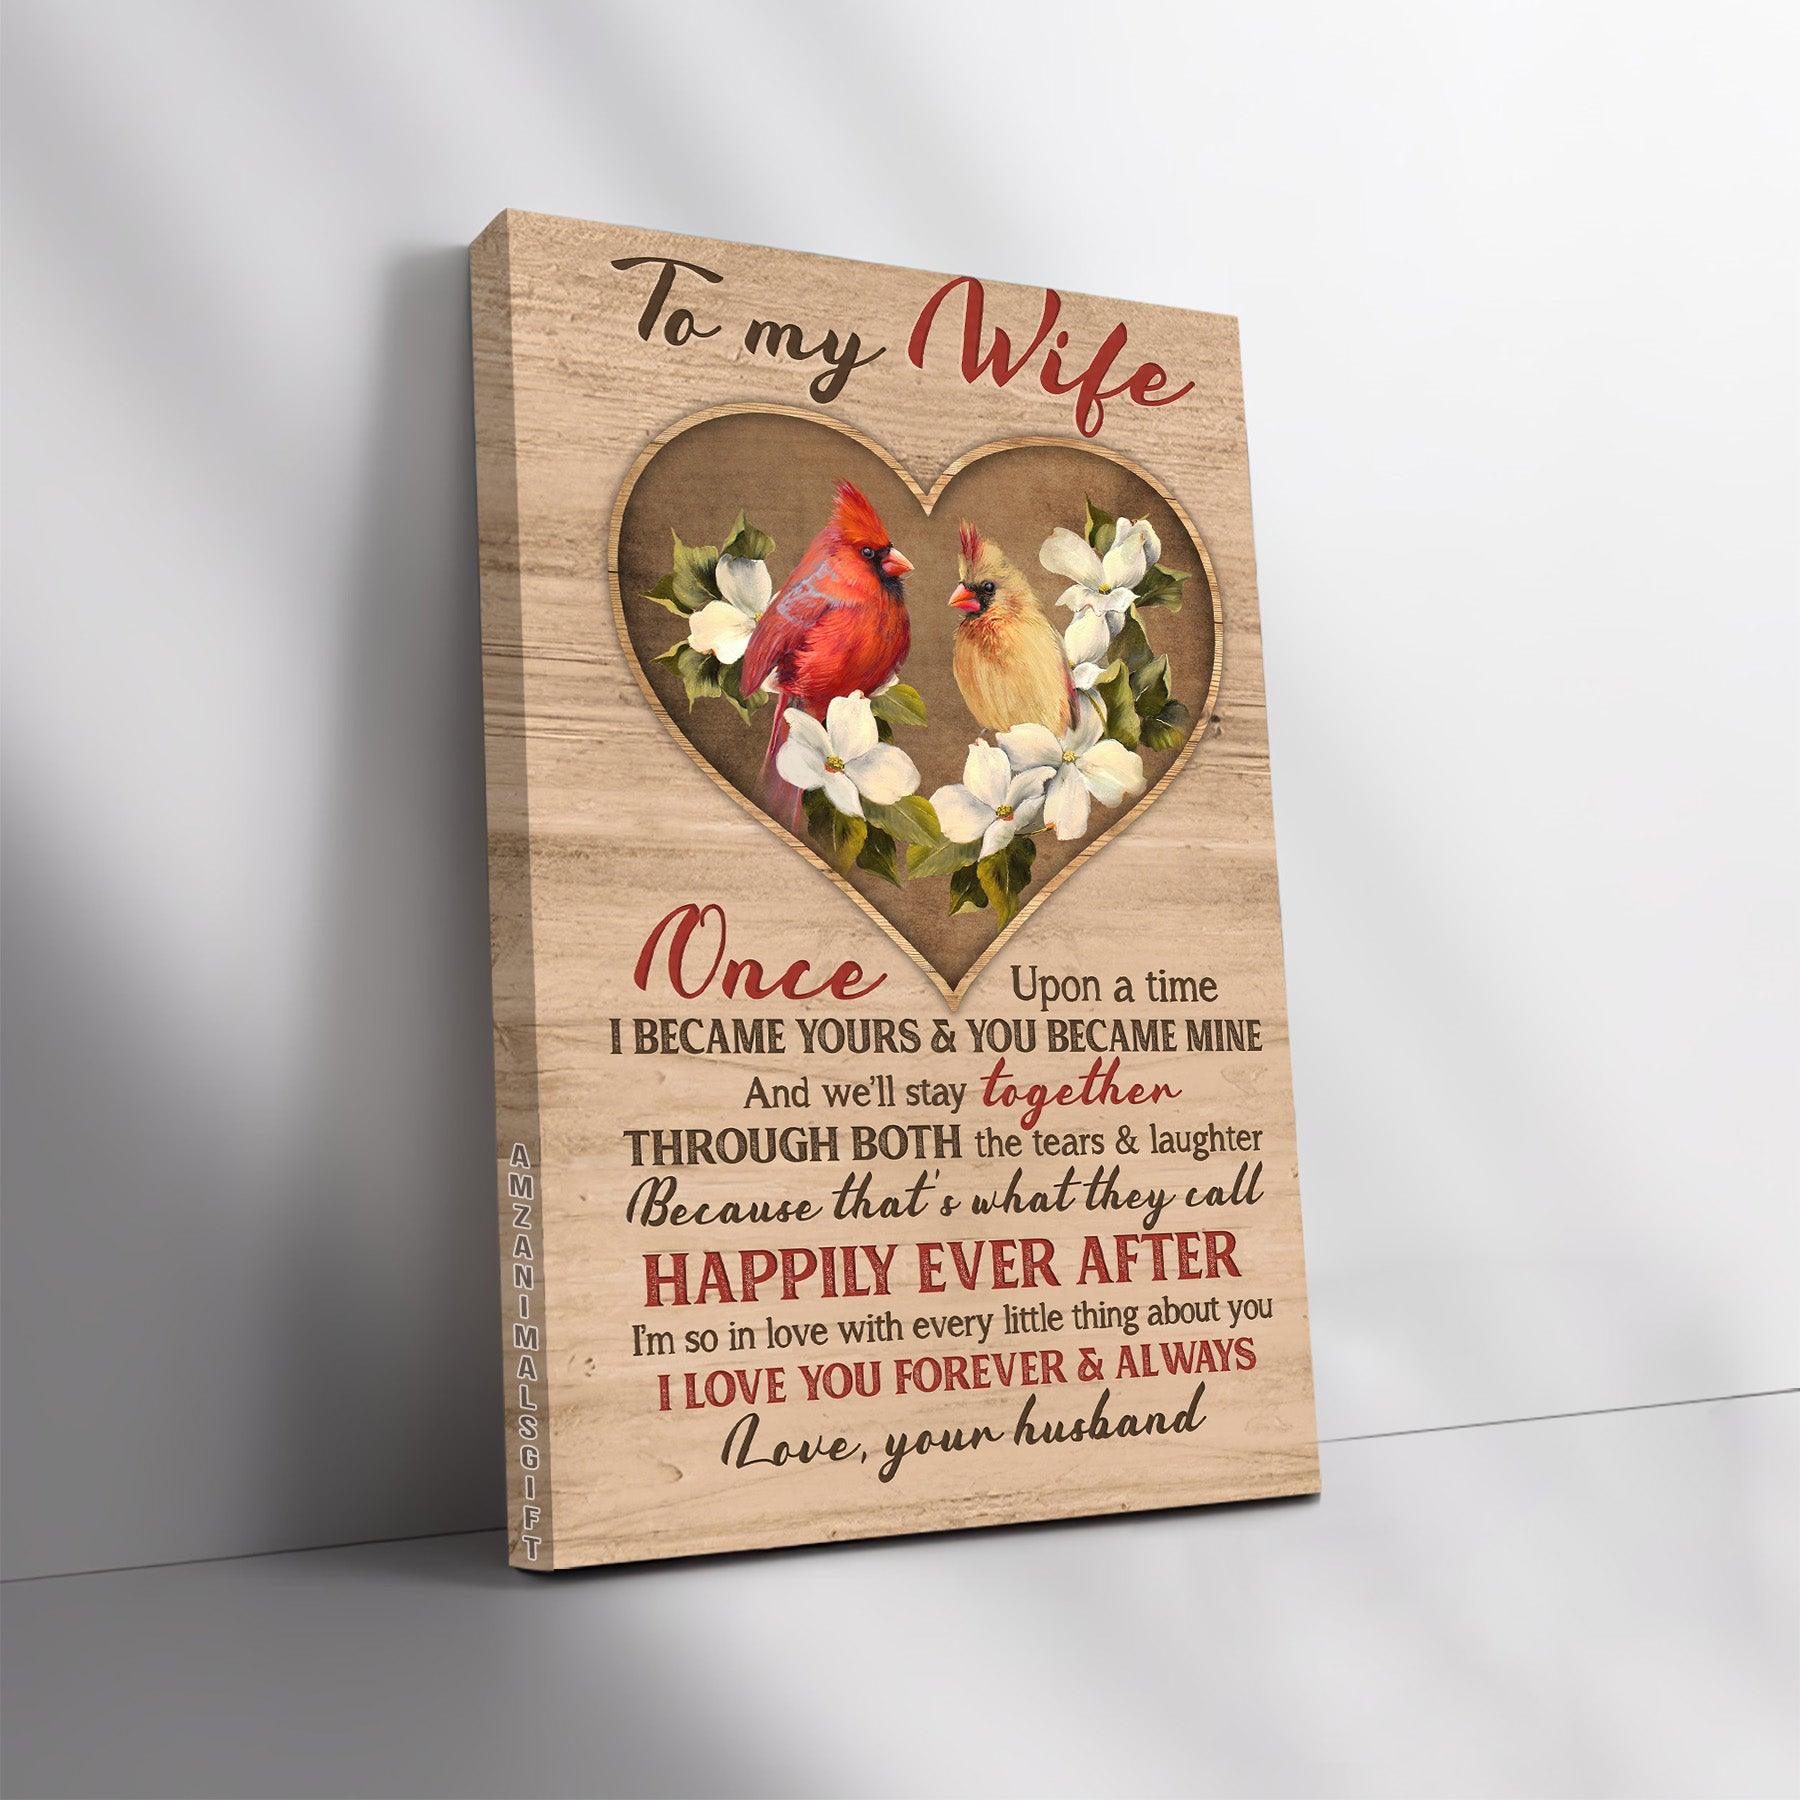 Couple Premium Wrapped Portrait Canvas - To My Wife, Heart Shape, Cardinal Painting, I Love You Forever And Always - Perfect Gift For Wife, Spouse - Amzanimalsgift